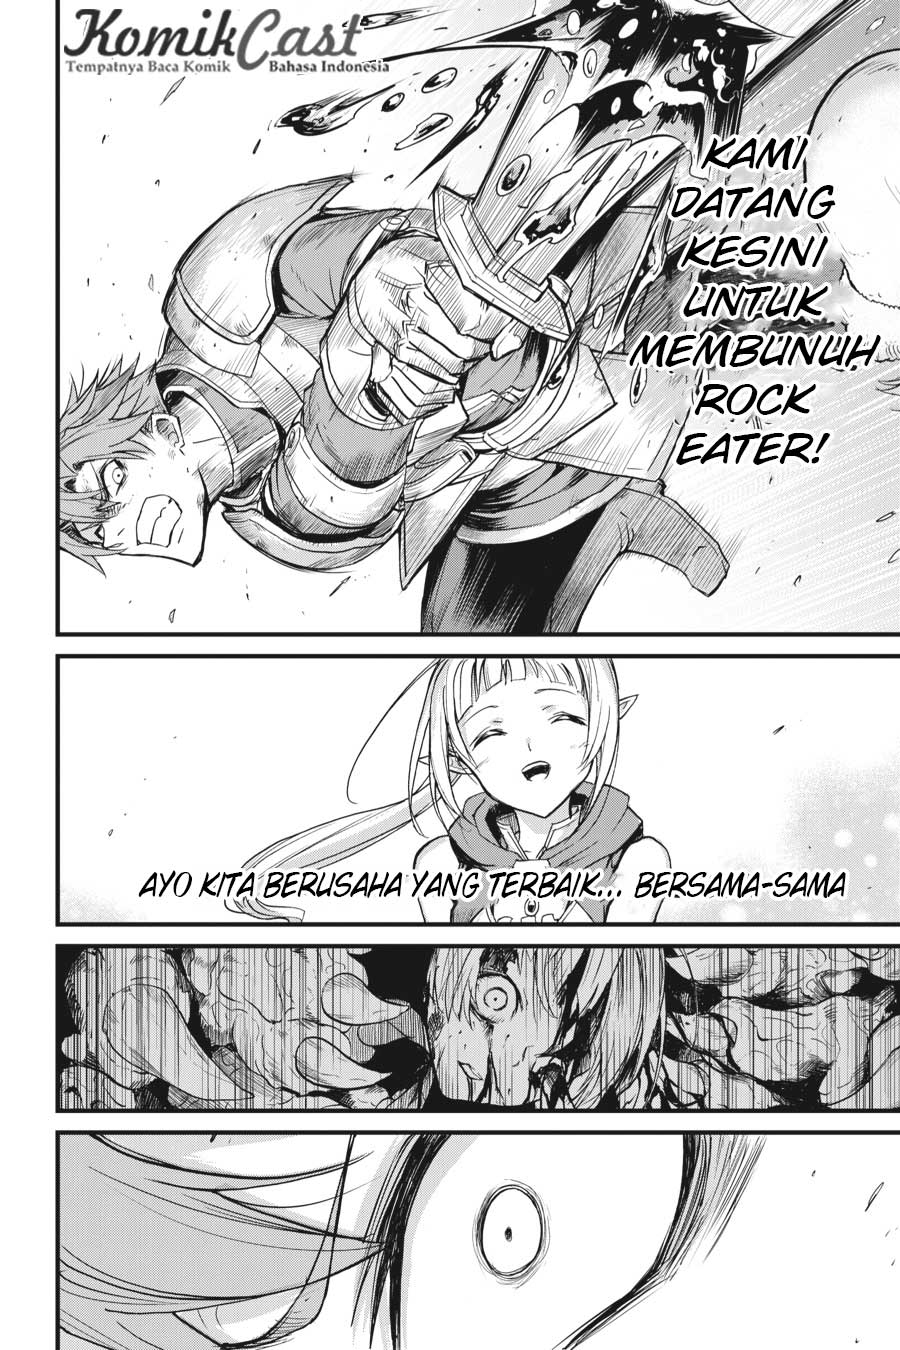 Goblin Slayer: Side Story Year One Chapter 16